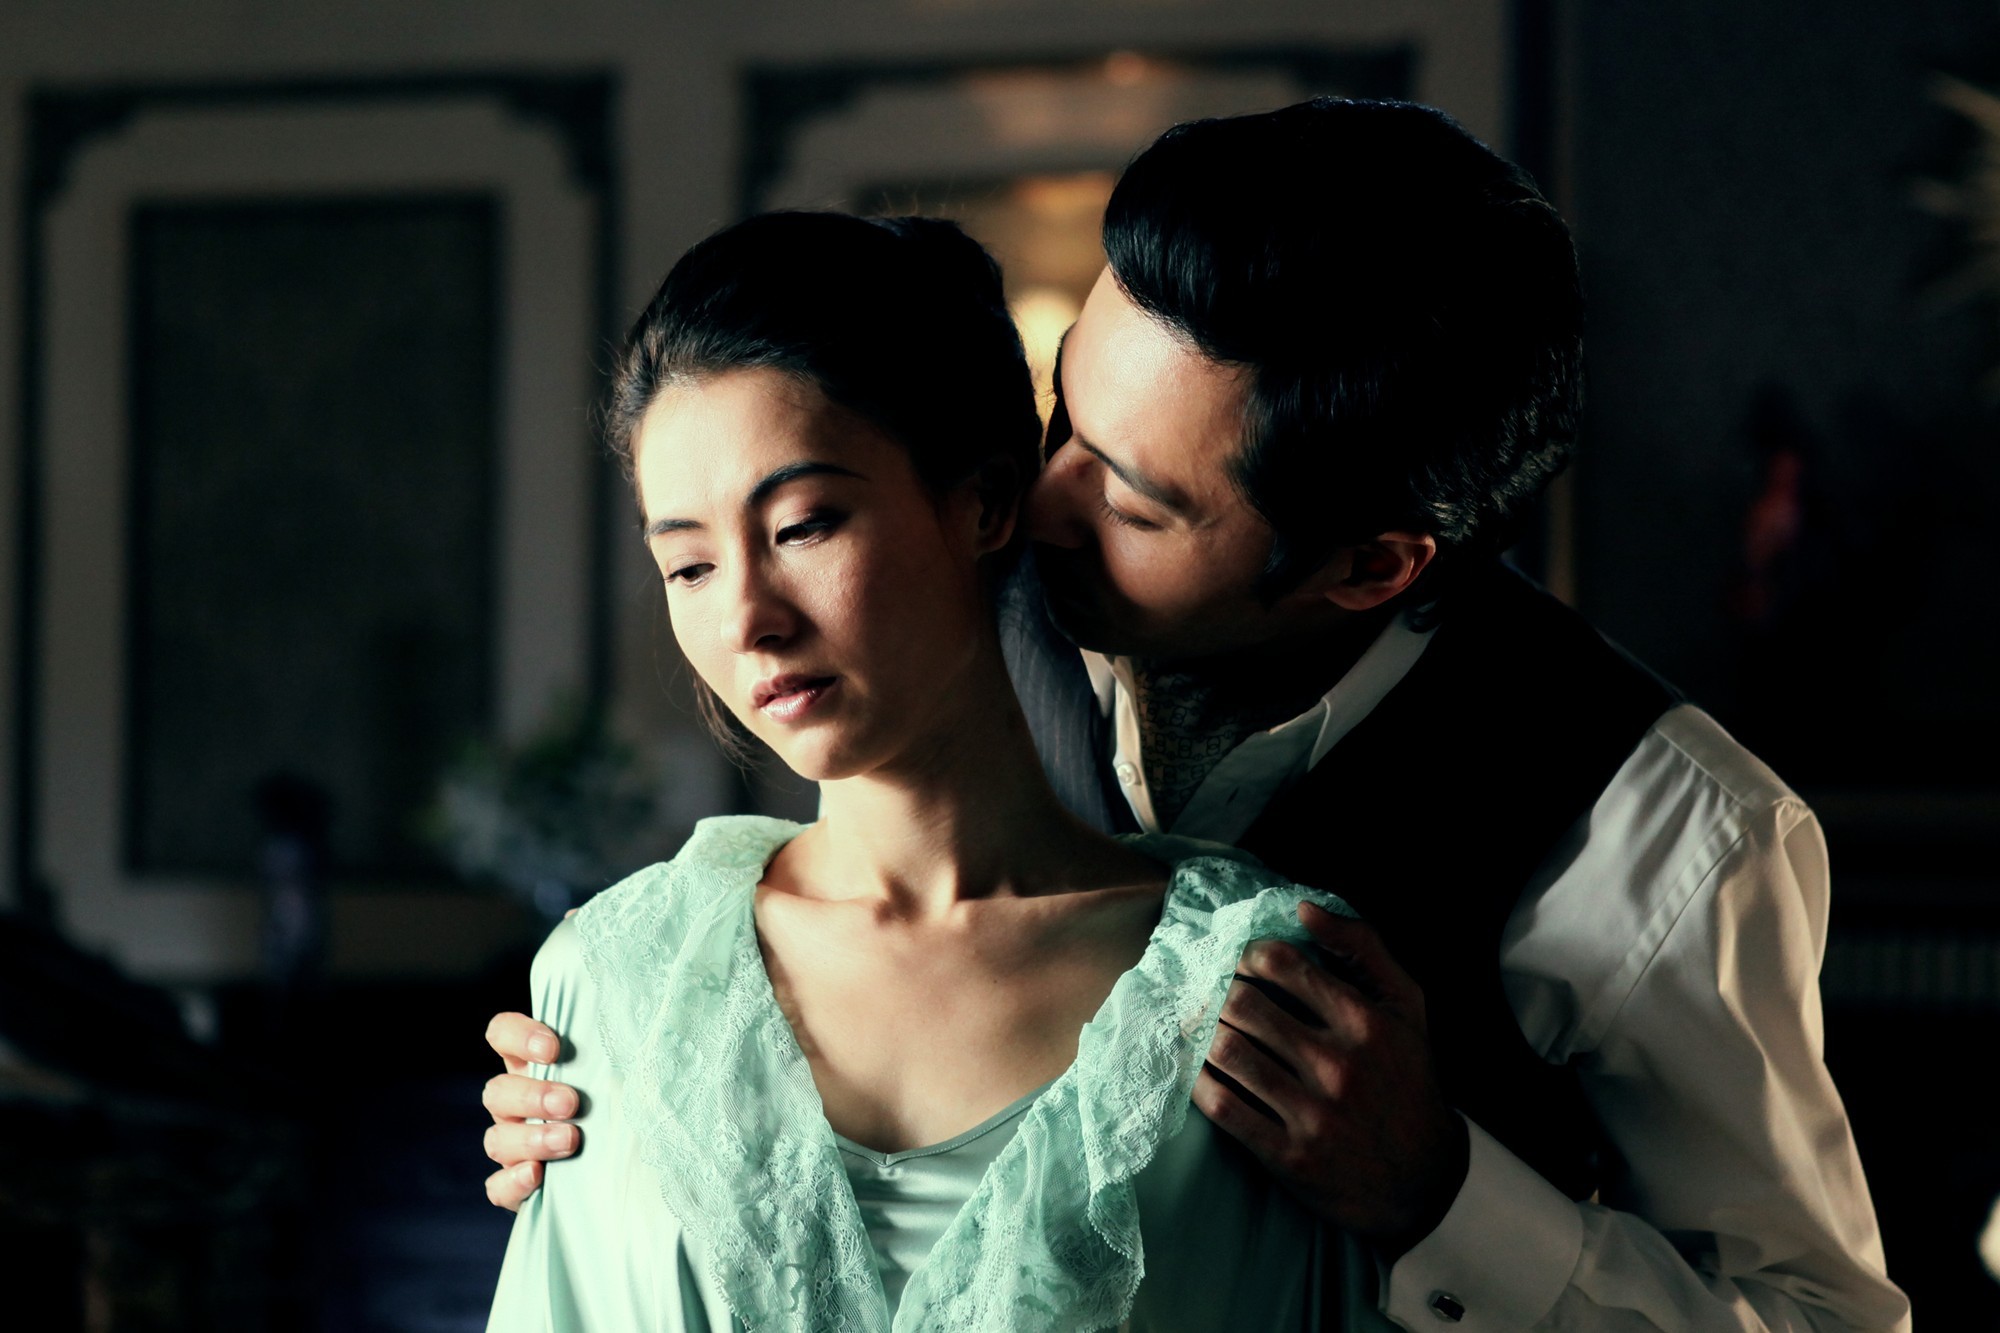 Cecilia Cheung and Jang Dong Gun in Well Go USA's Dangerous Liaisons (2012)